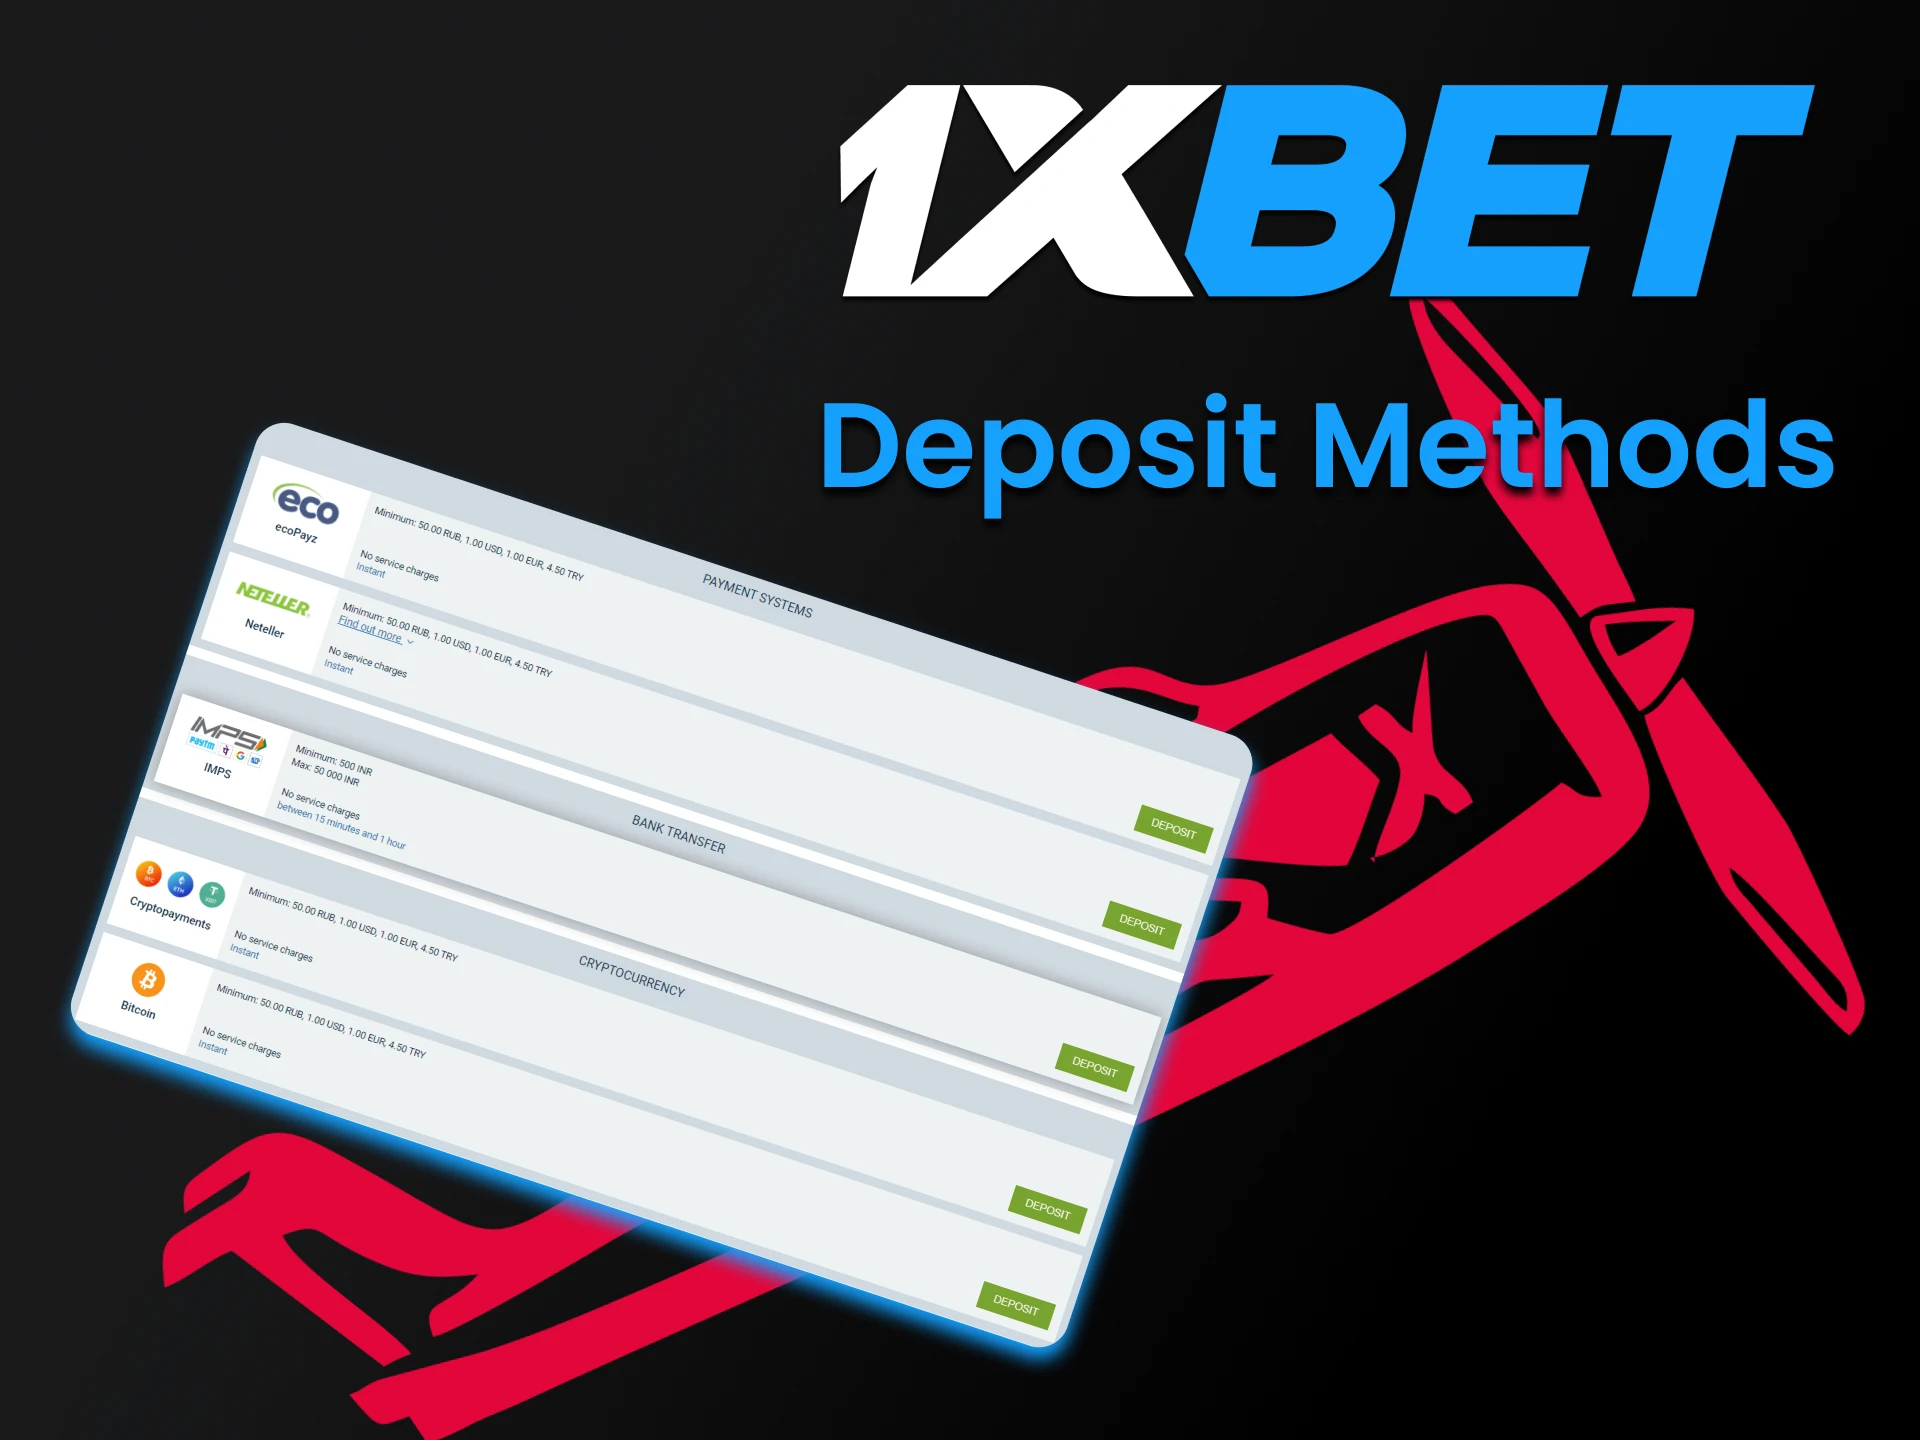 To win real money, you need to replenish funds in a convenient way from 1xbet.